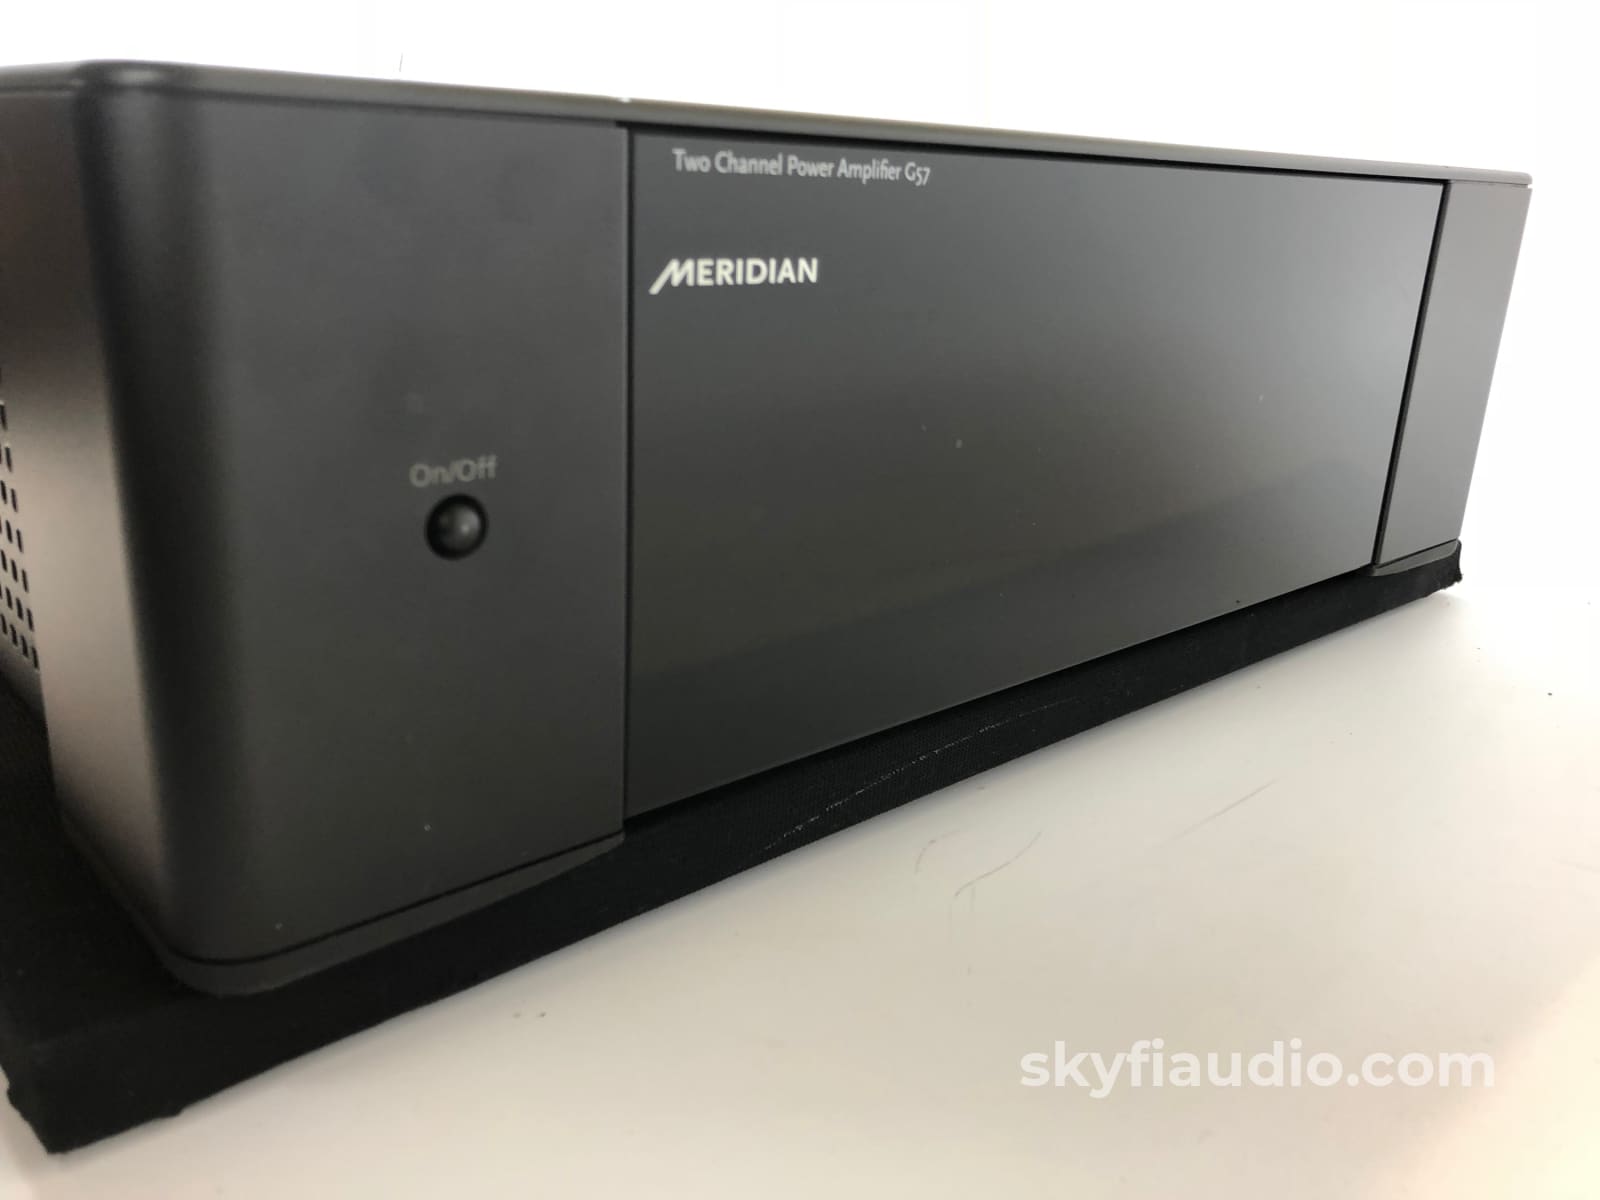 Meridian G57 200W Solid State Amplifier - Complete And Like New